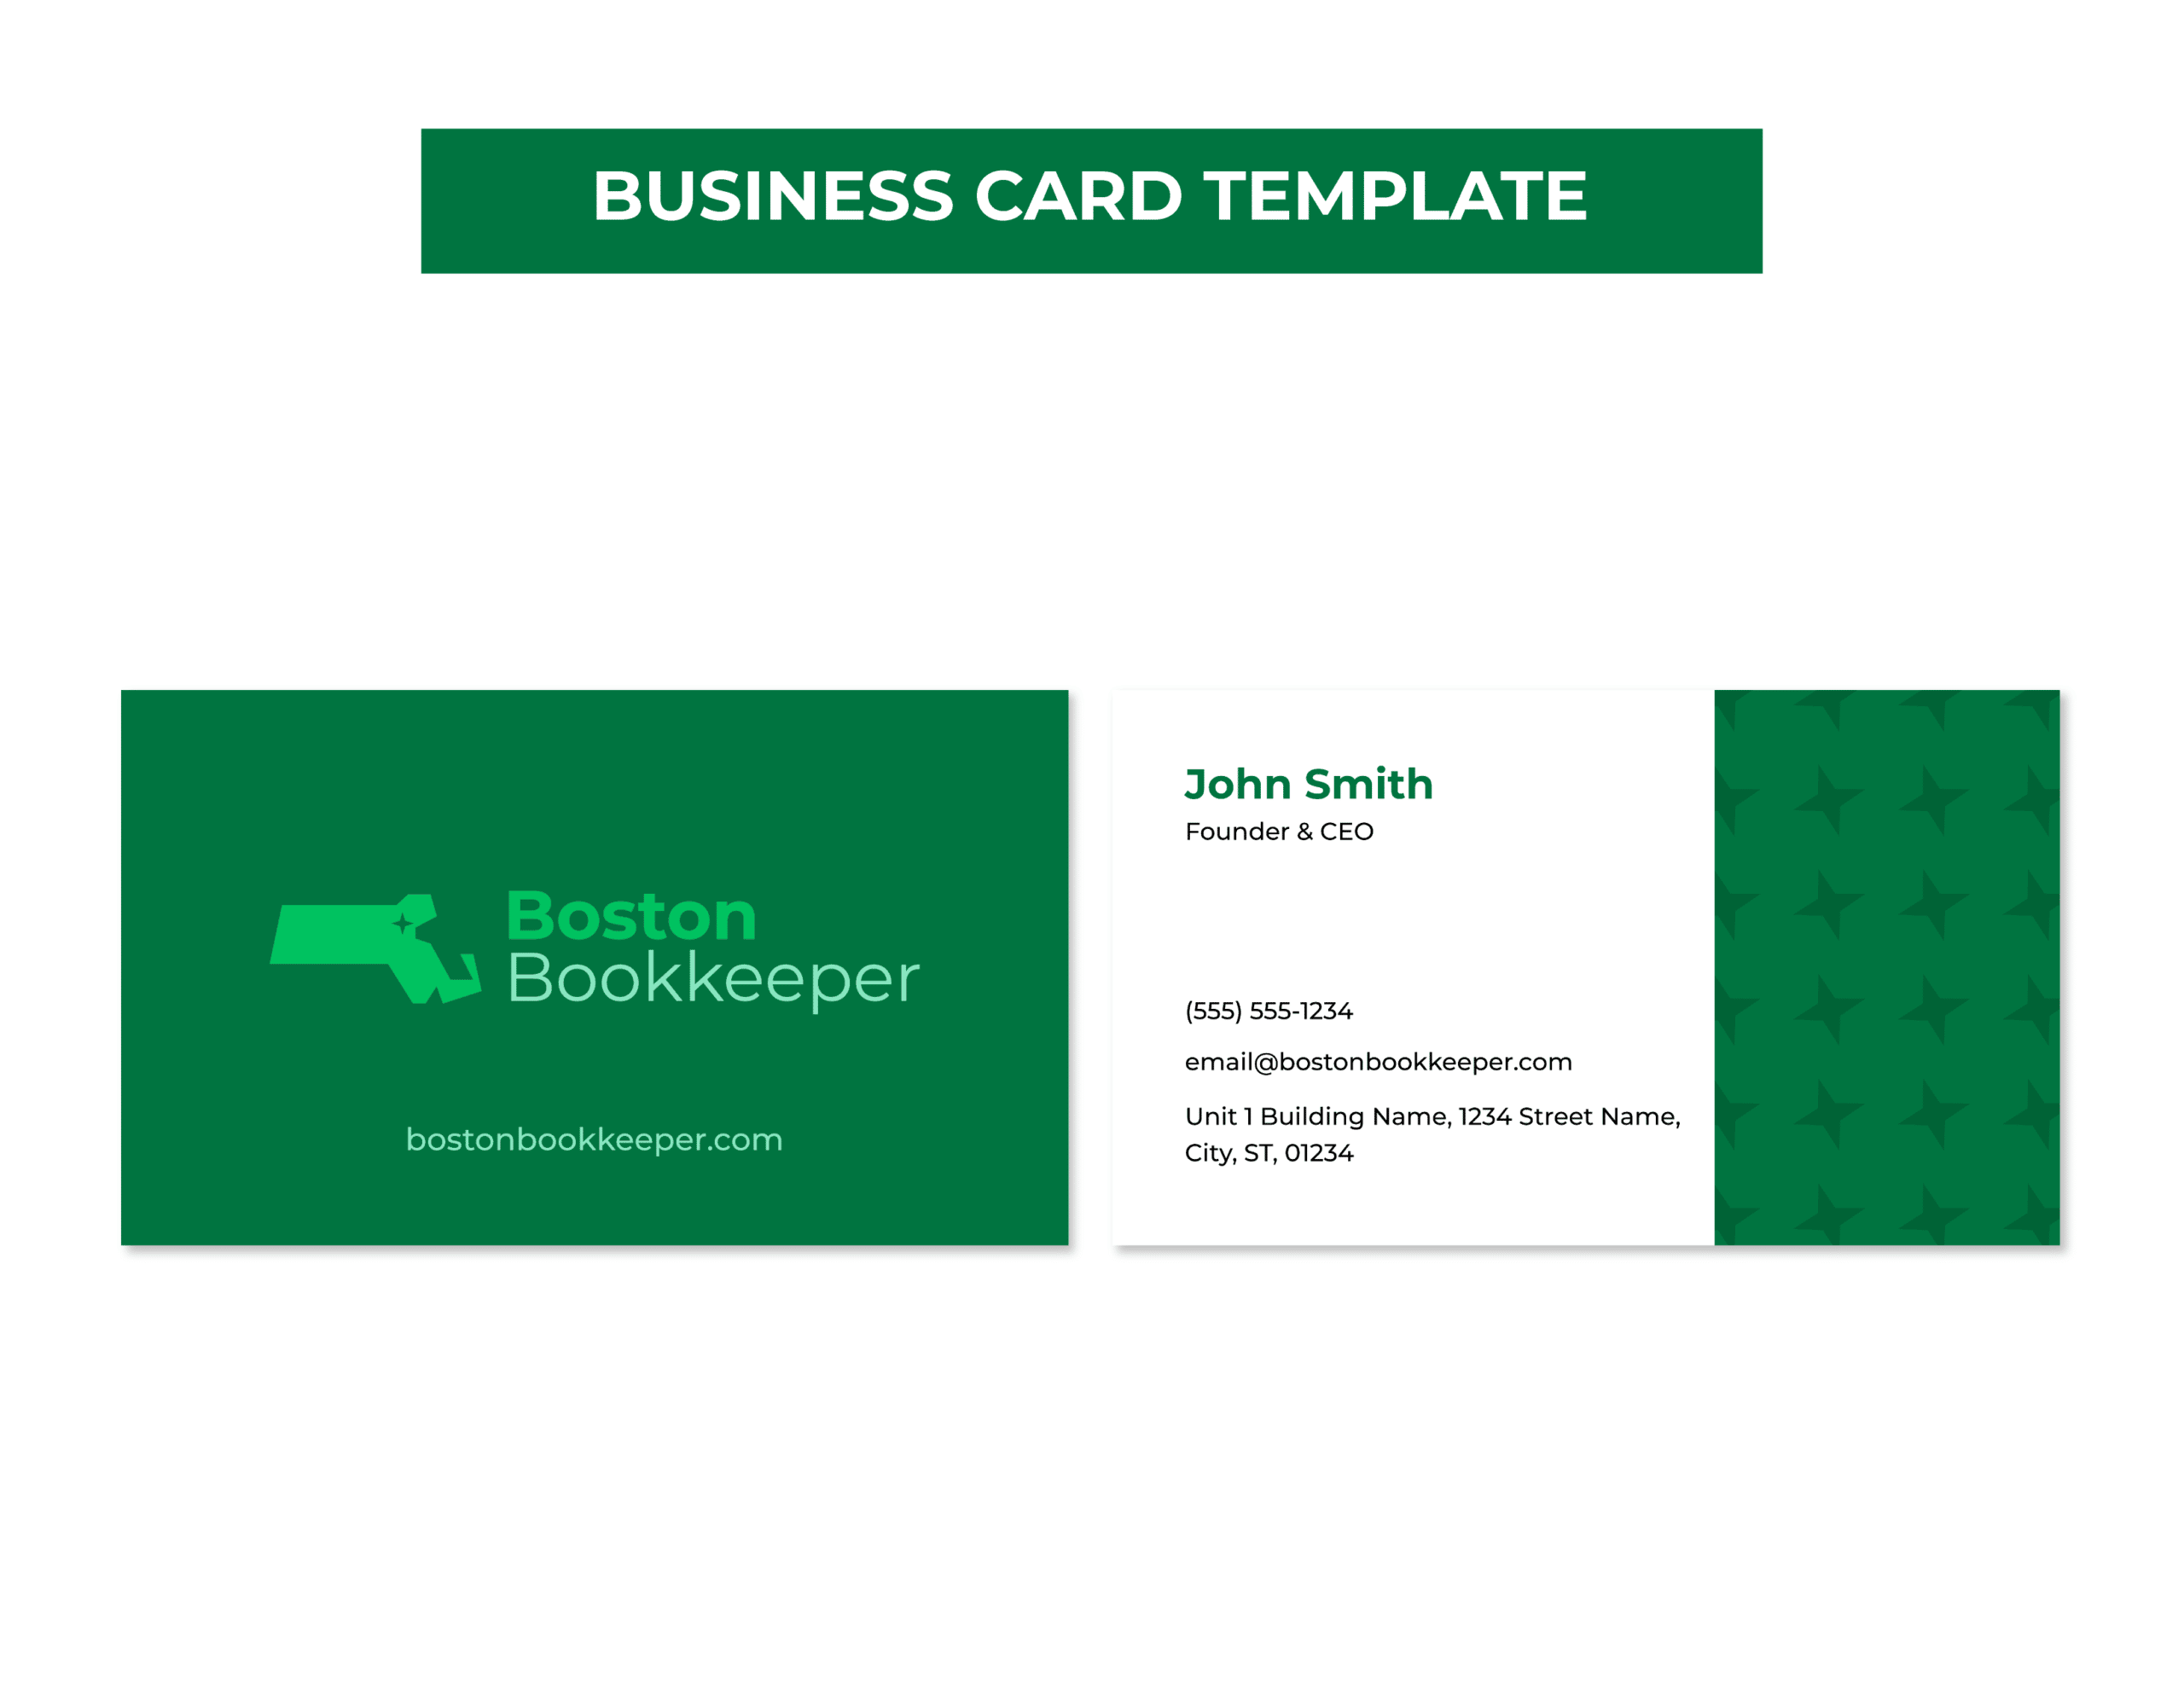 04Boston_Bookkeeper__Business Card Template